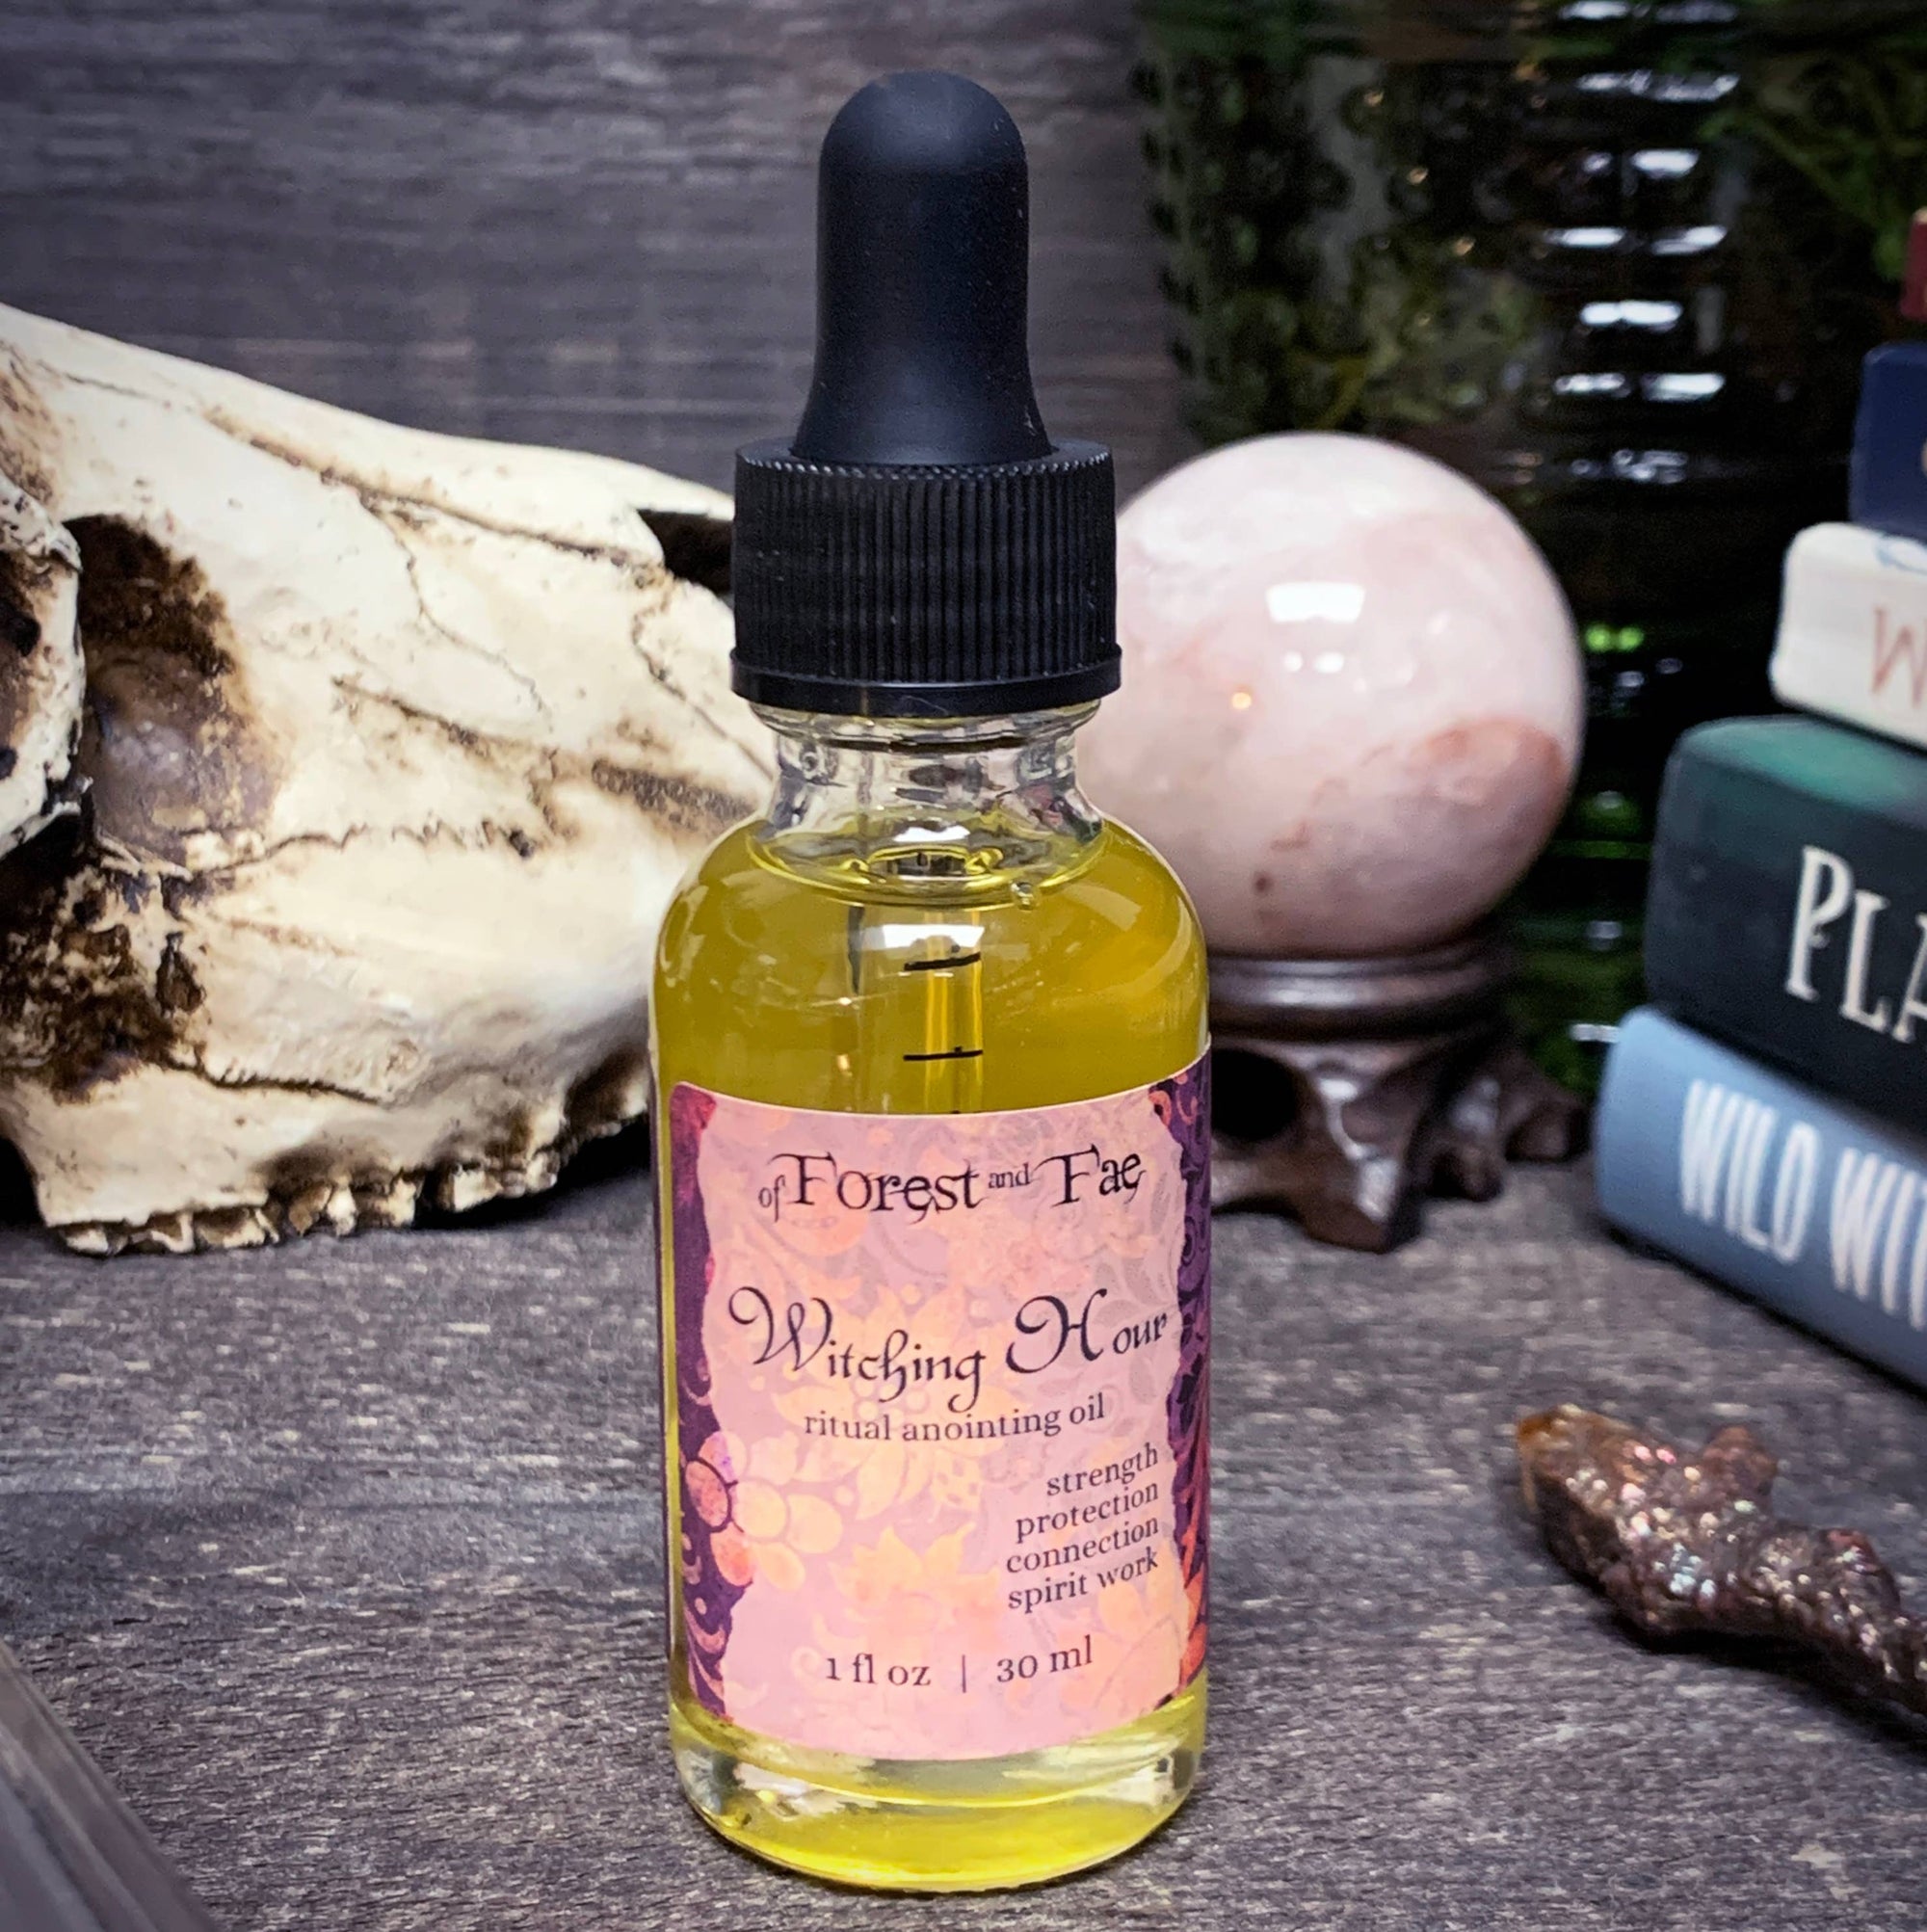 Witching Hour Sacred Ritual Oil | Anointing Oil | Altar Oil | Spellcrafting | Witchcraft | Candle Dressing Oil | Altar Tools | Witchy Tools